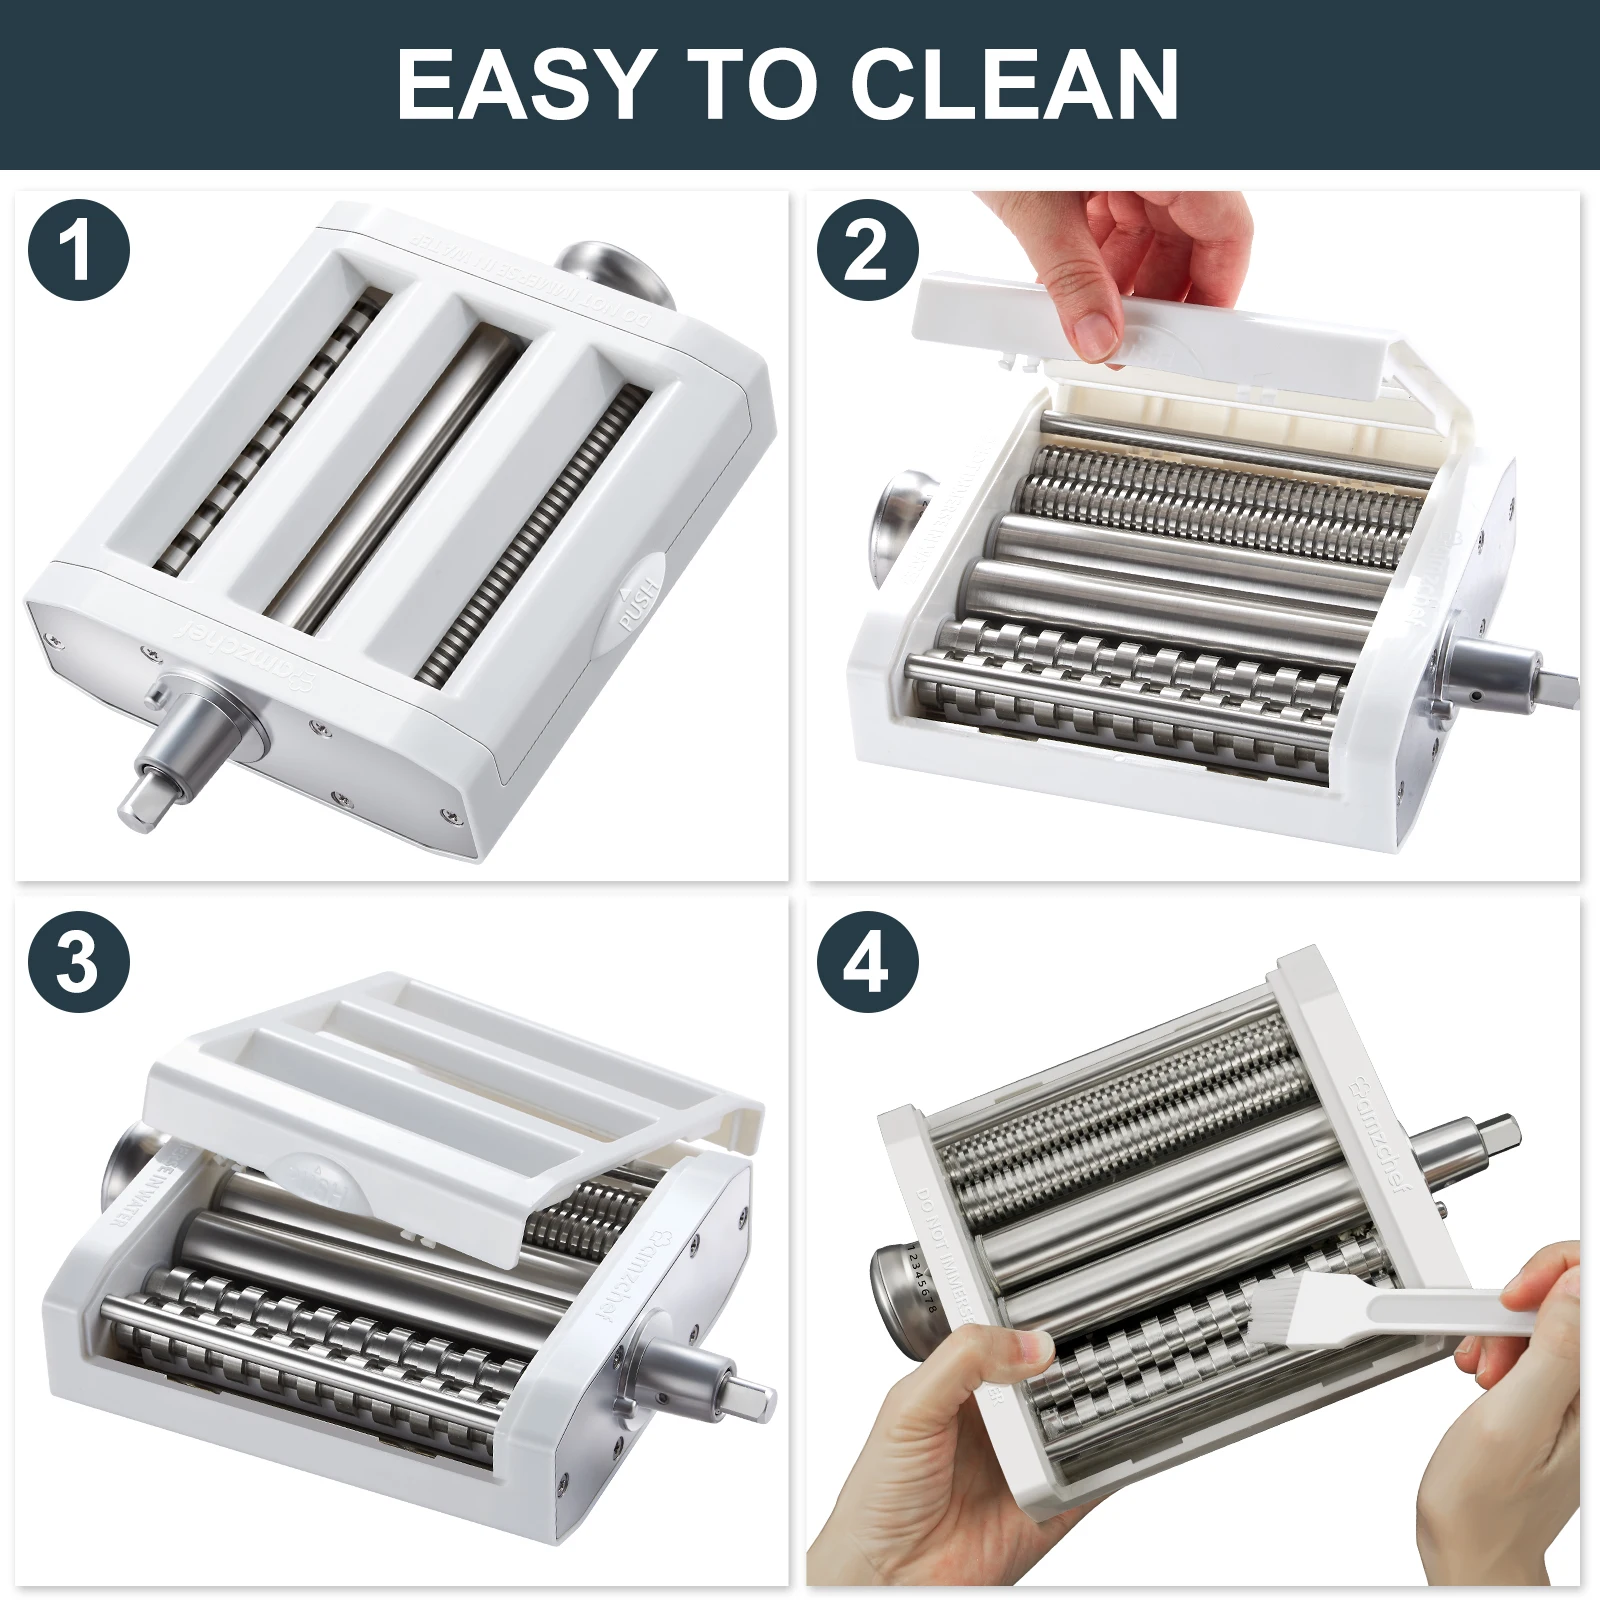 https://ae01.alicdn.com/kf/S11d436a88816491cac7b106f4e3e78a9O/AMZCHEF-New-3-in-1-Pasta-Roller-Cutter-Set-Attachment-DT-10-A-for-Kitchenaid-Noodle.jpg